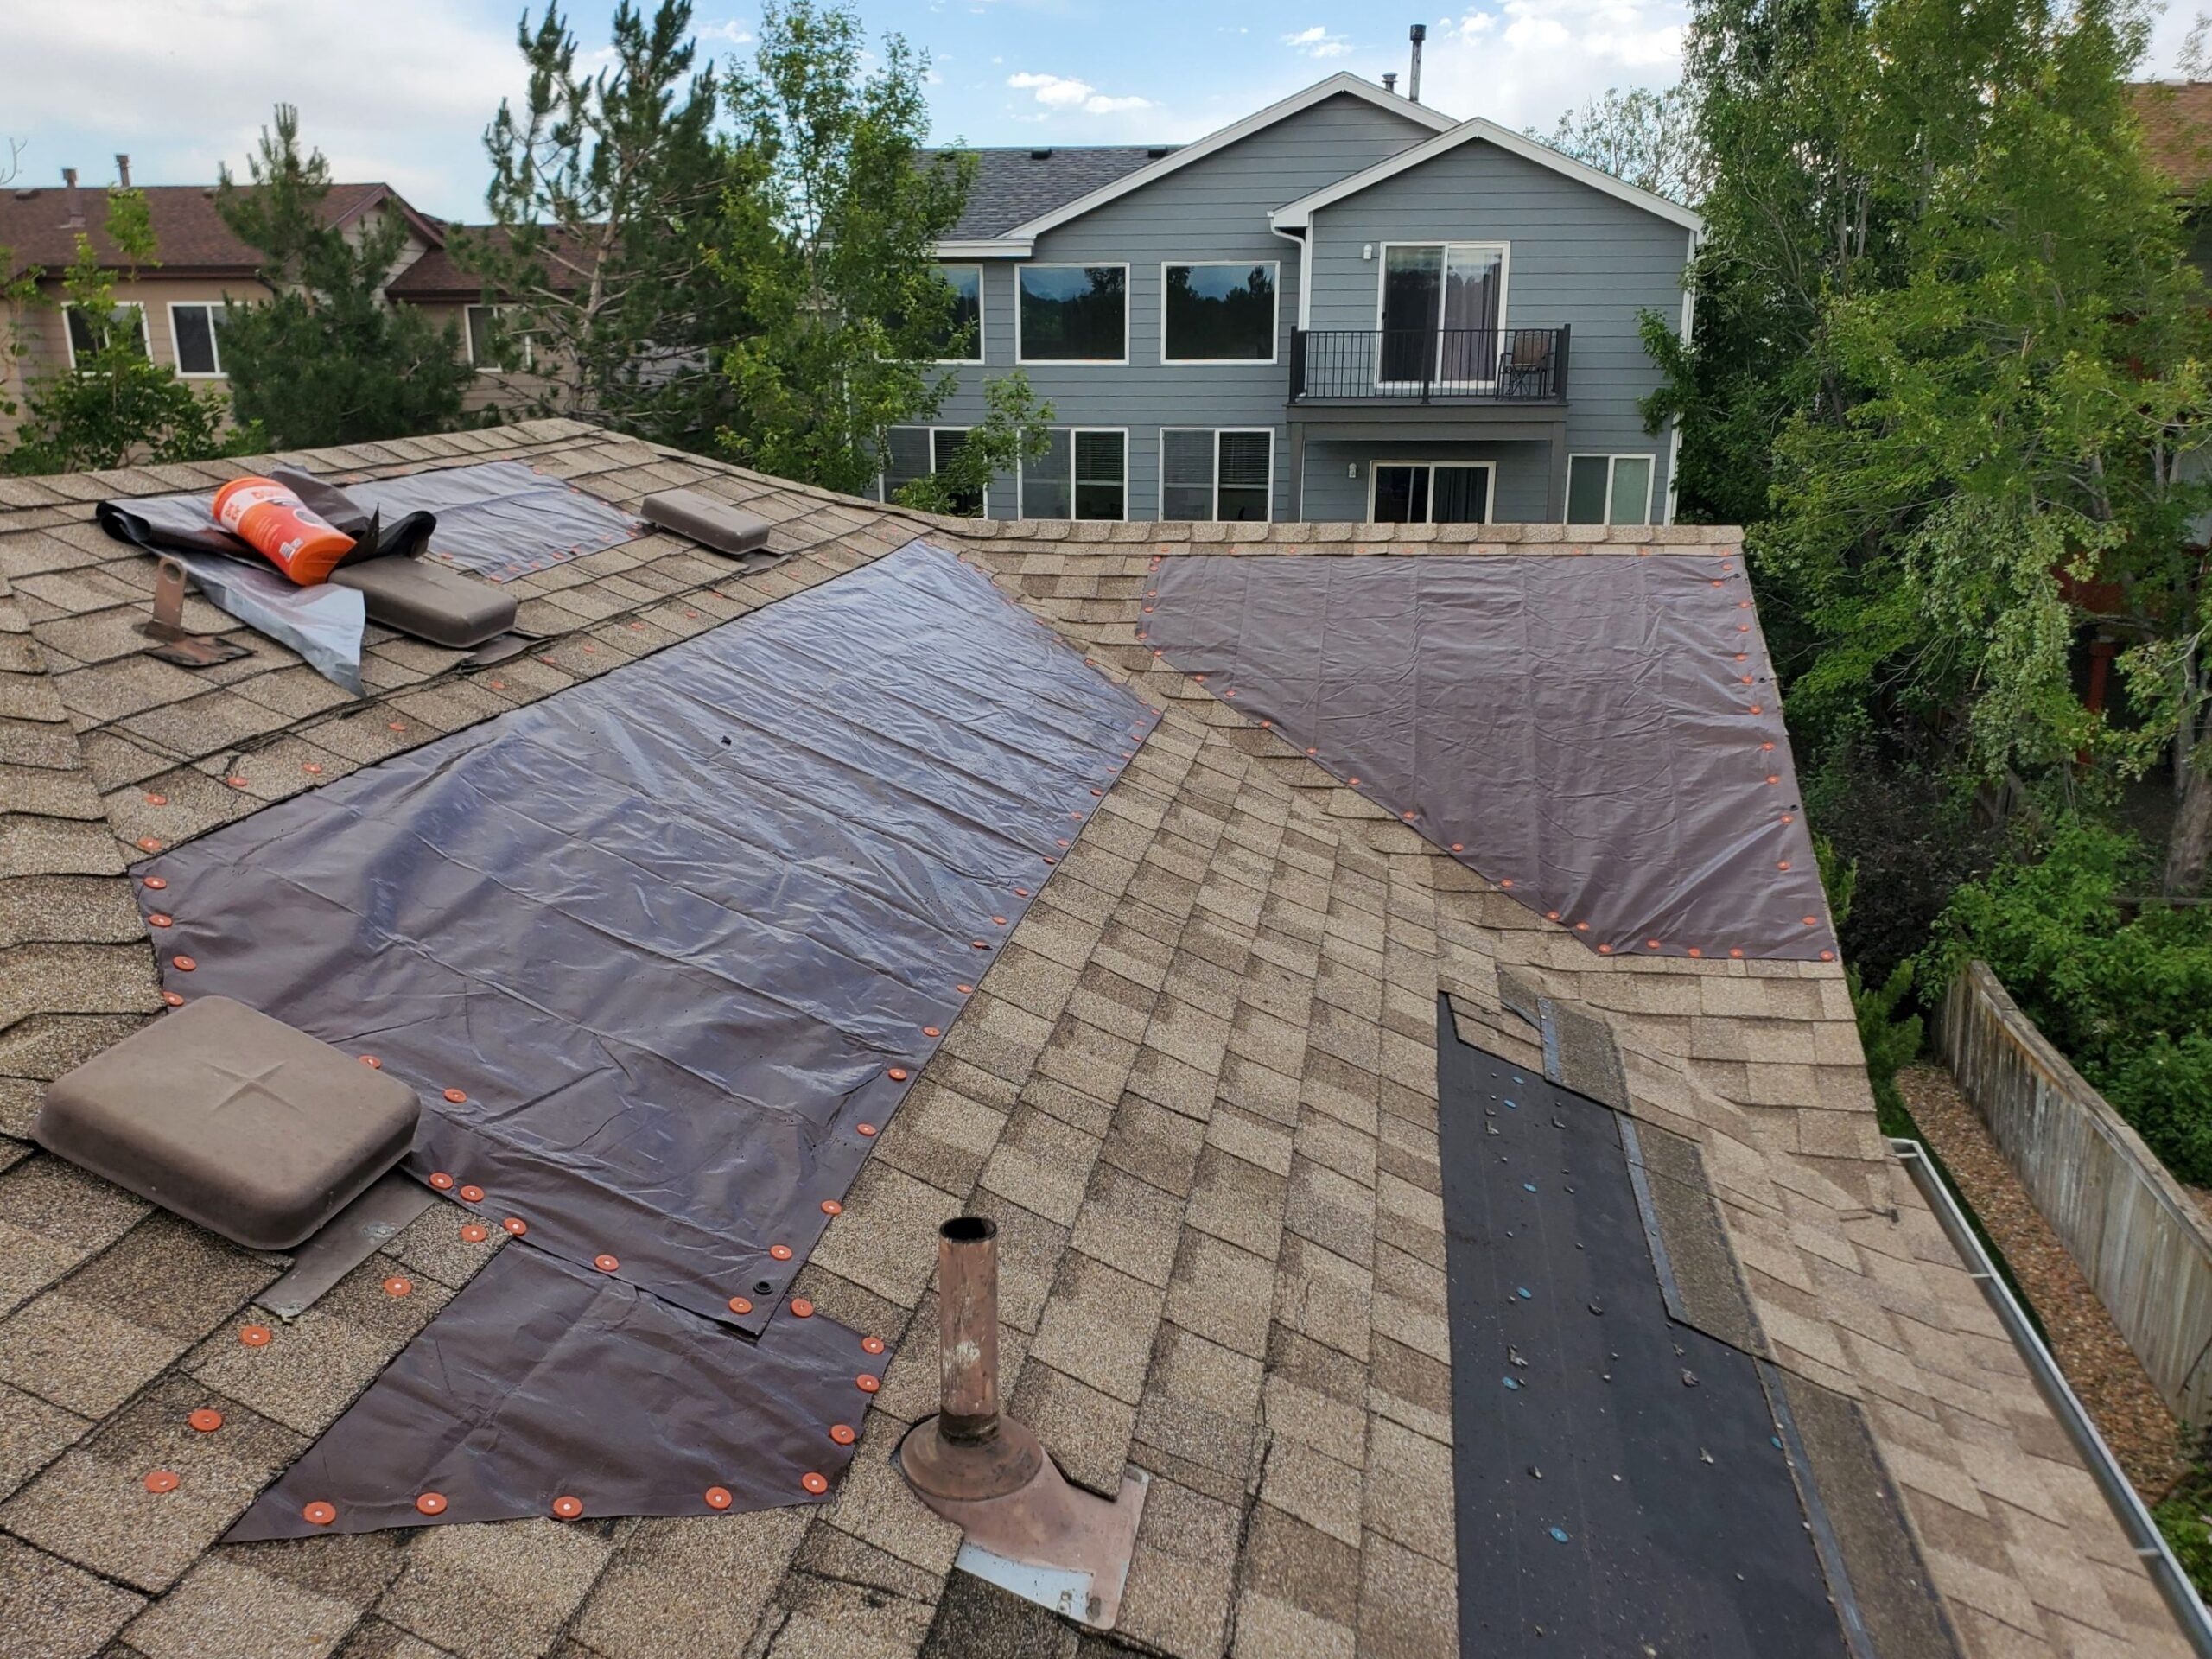 Tarp-covered section of a residential roof indicating repair work in progress.